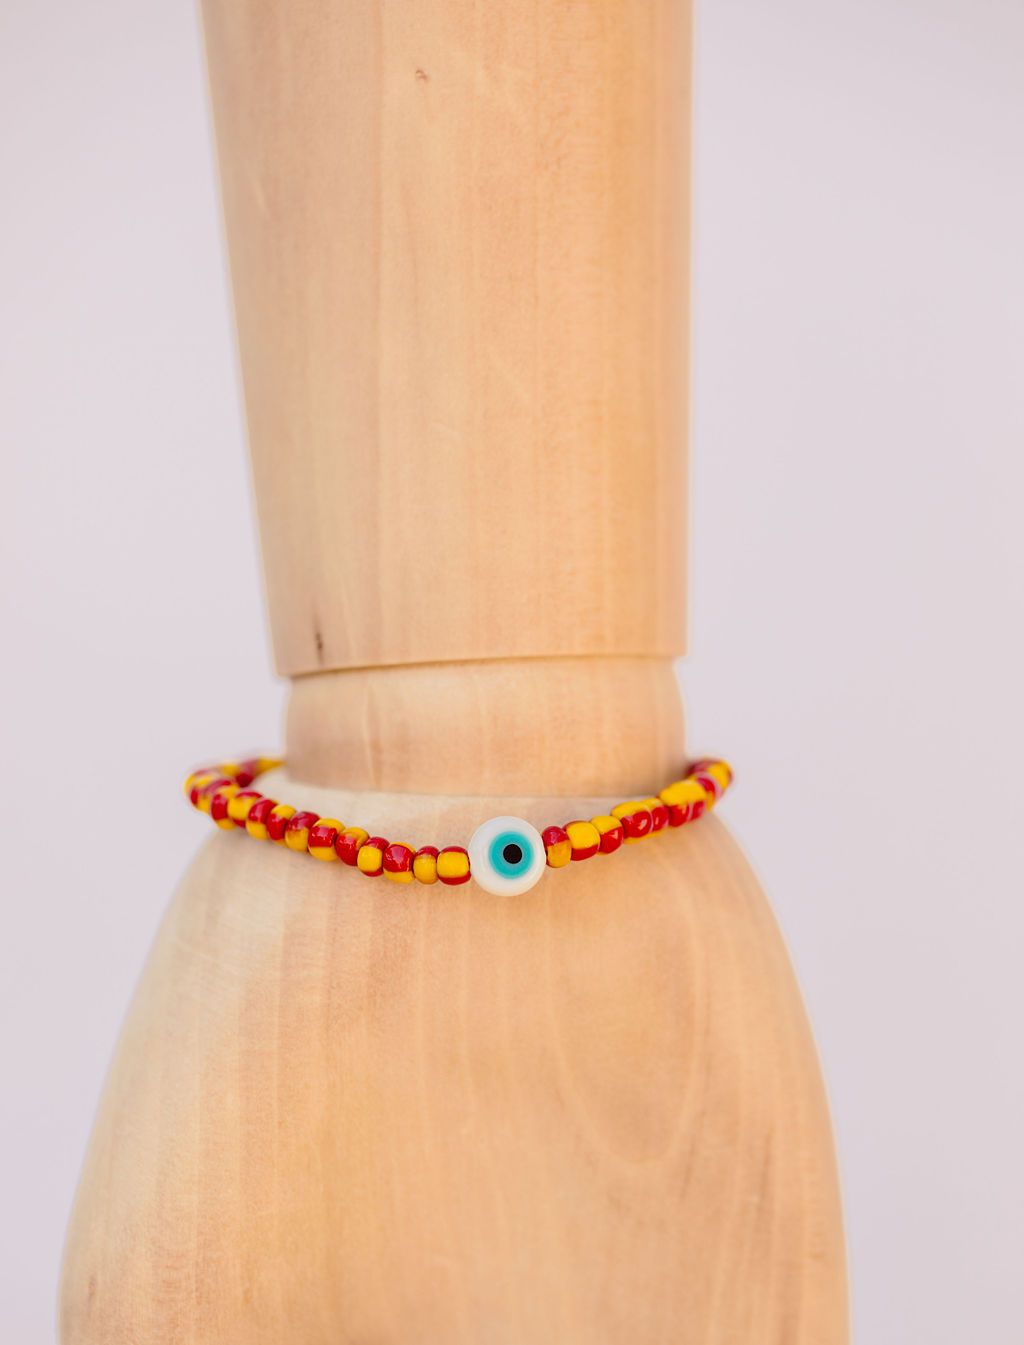 Red & yellow Japanese glass beads on sturdy elastic. For that little pop of color and protection for your personal space bubble. Wear just one or stack 'em.